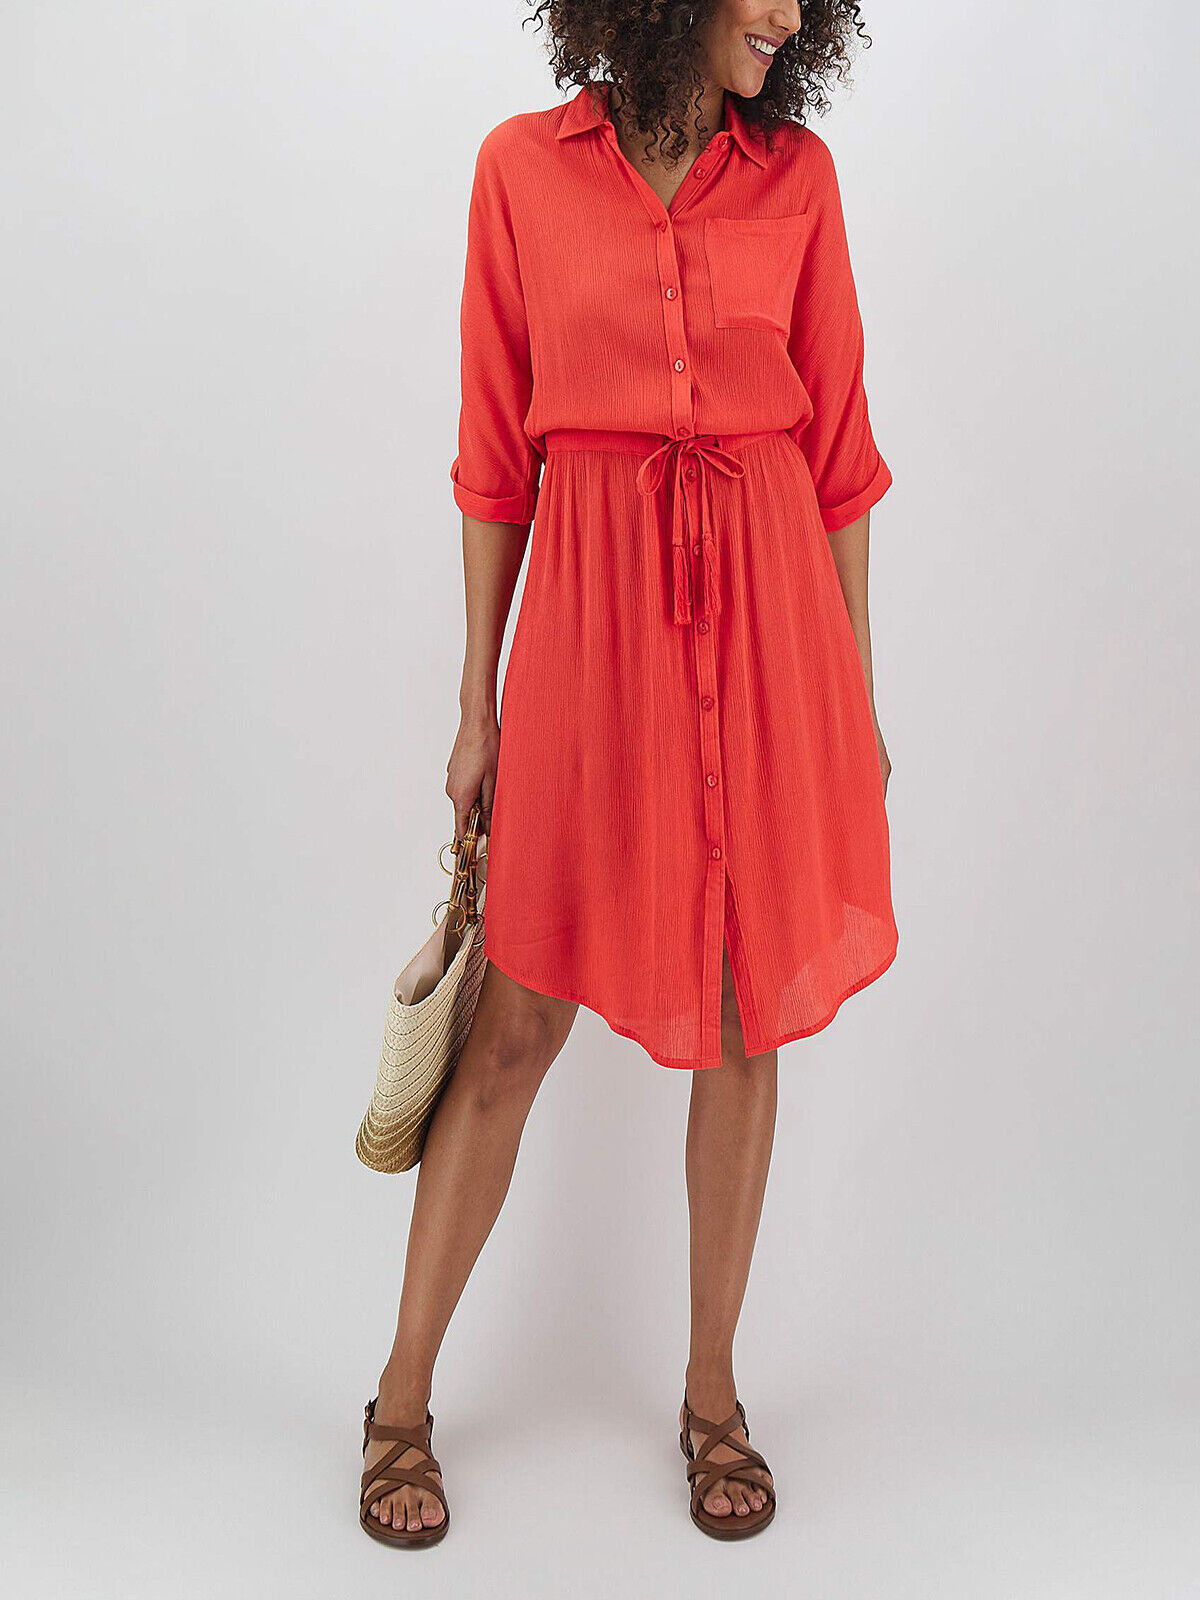 JD Williams Coral Crinkle Tie Waist Shirt Dress in Size 26